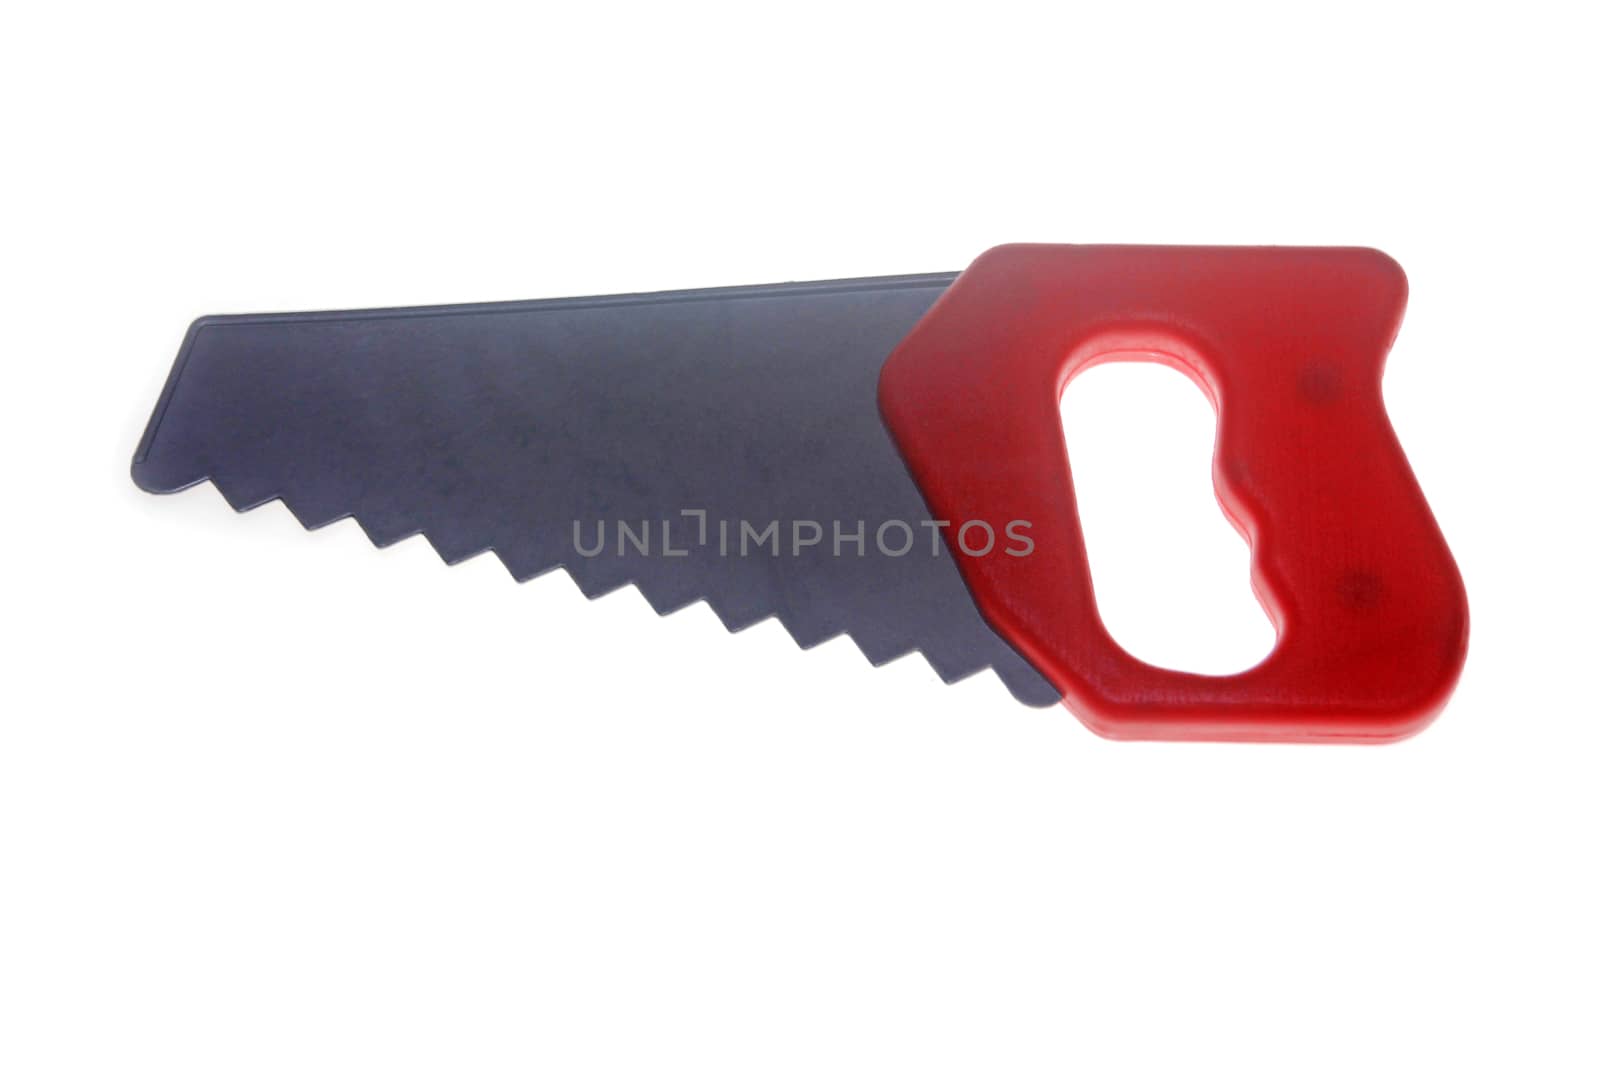 Hand saw , working tool by yands